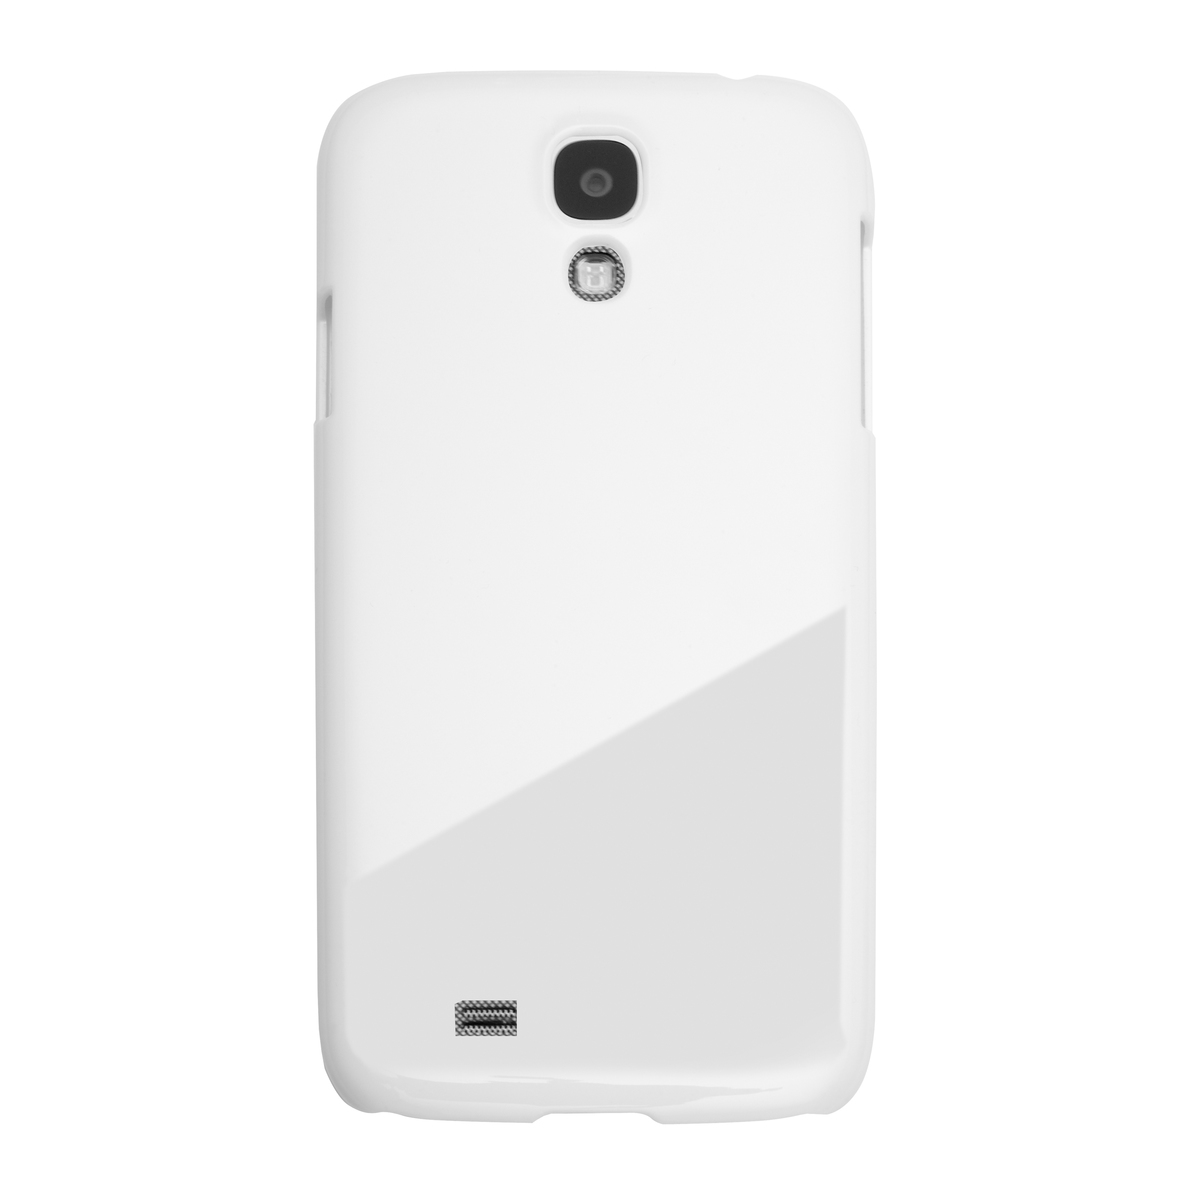 LM Smartphonecover REFLECTS-COVER VII Galaxy S4 WHITE weiß